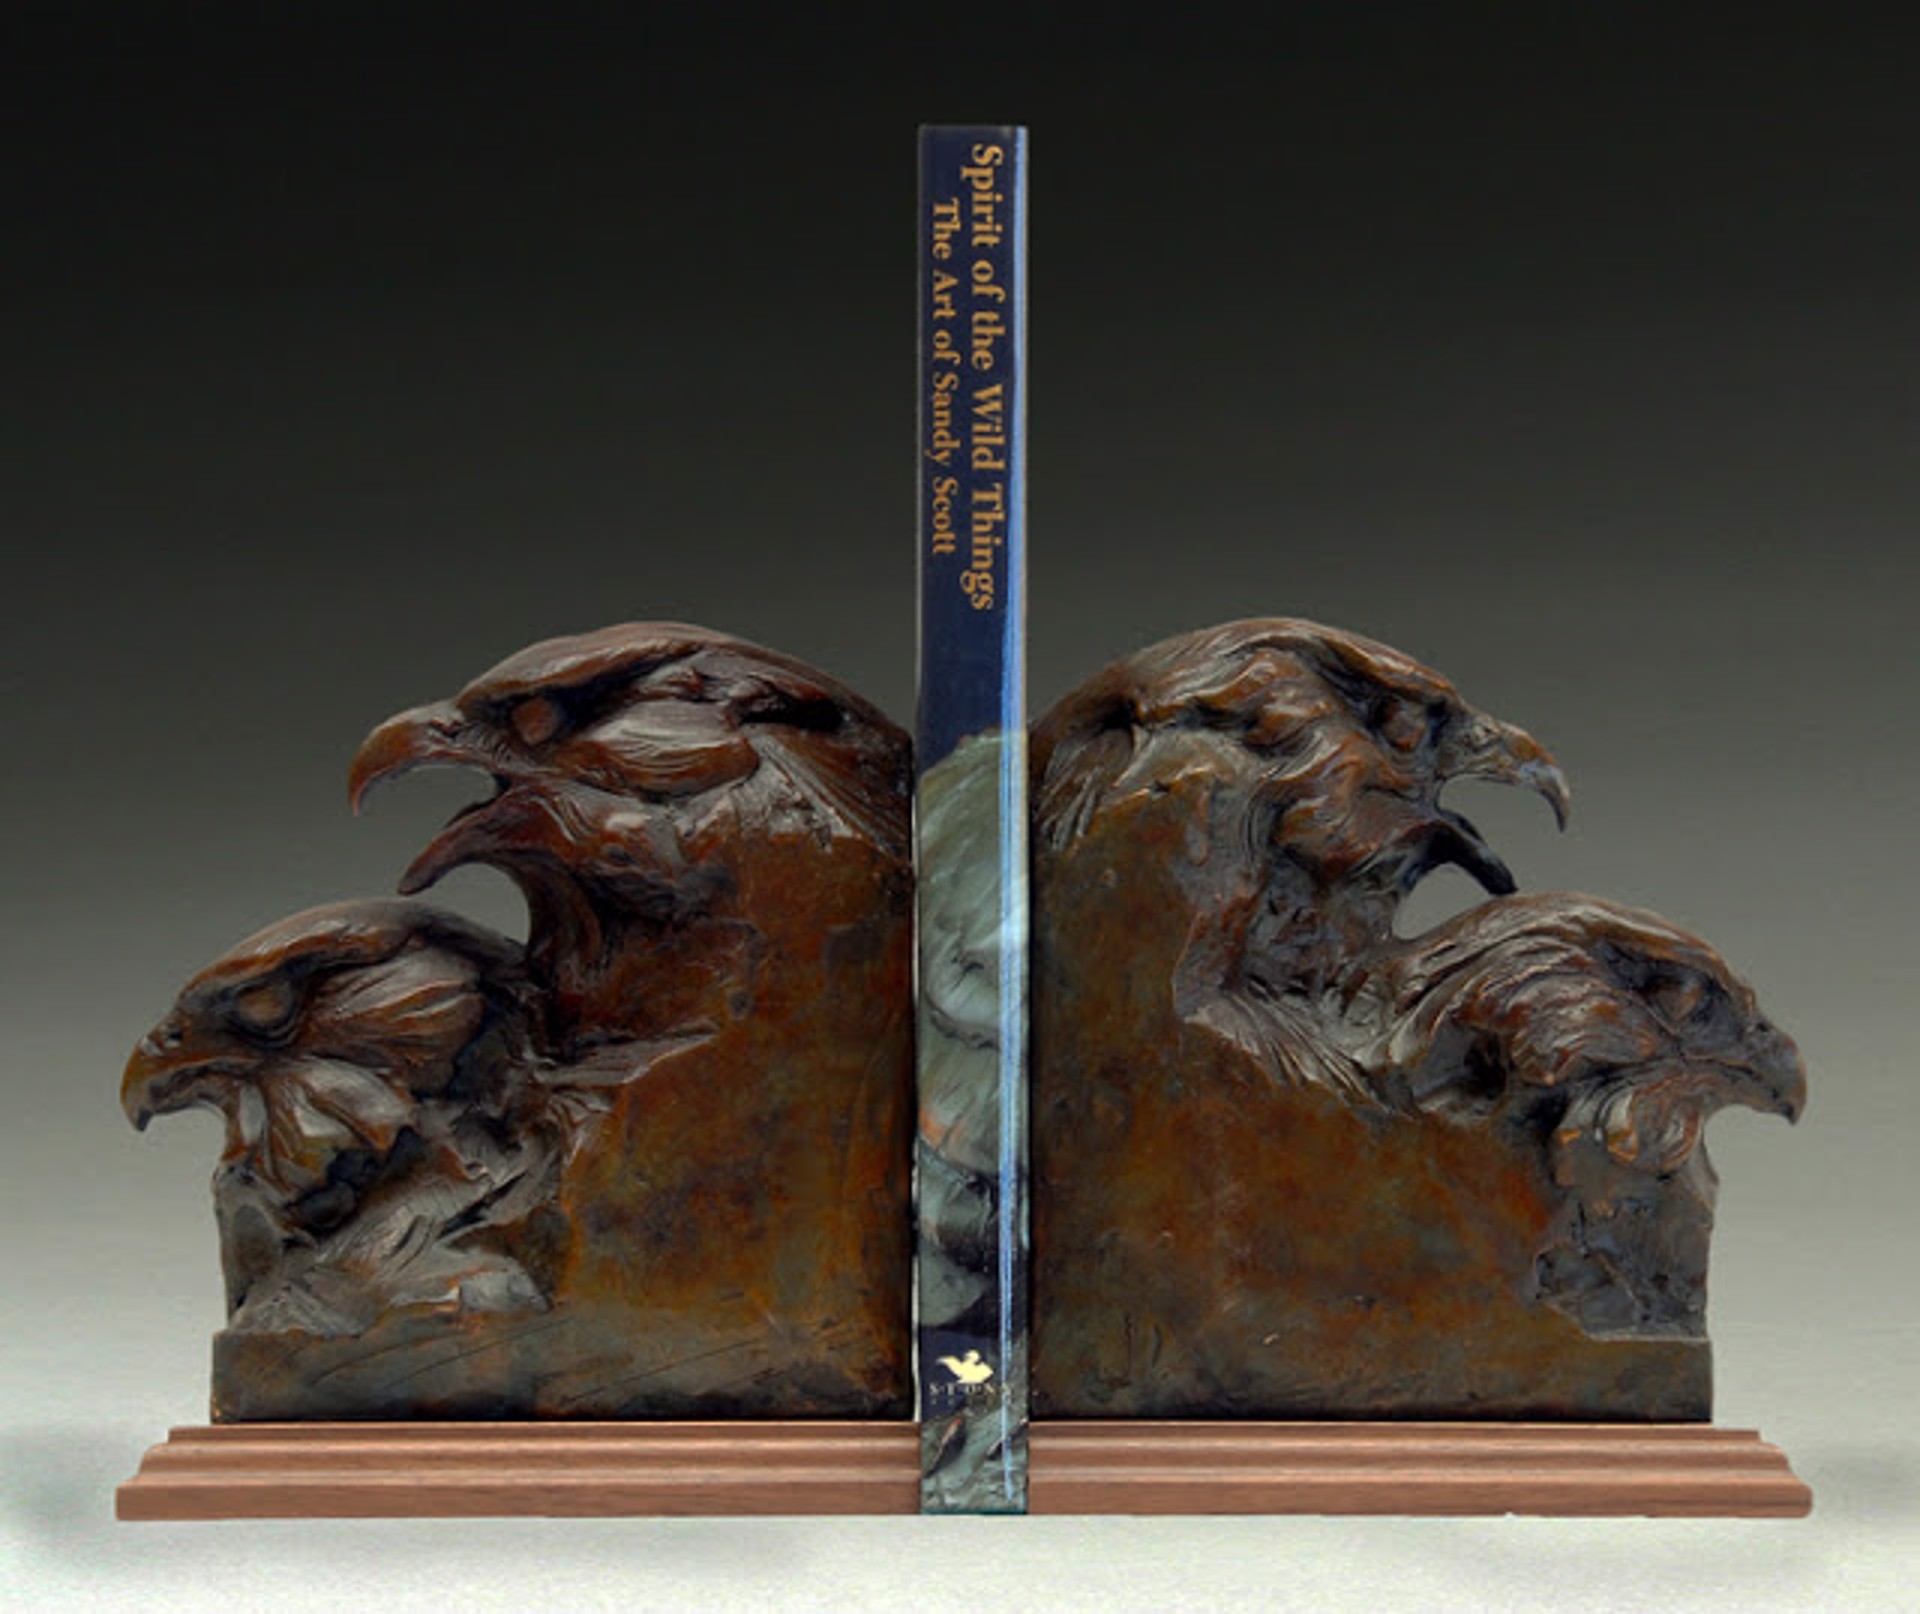 Reflection and Resolve Bookends by Sandy Scott